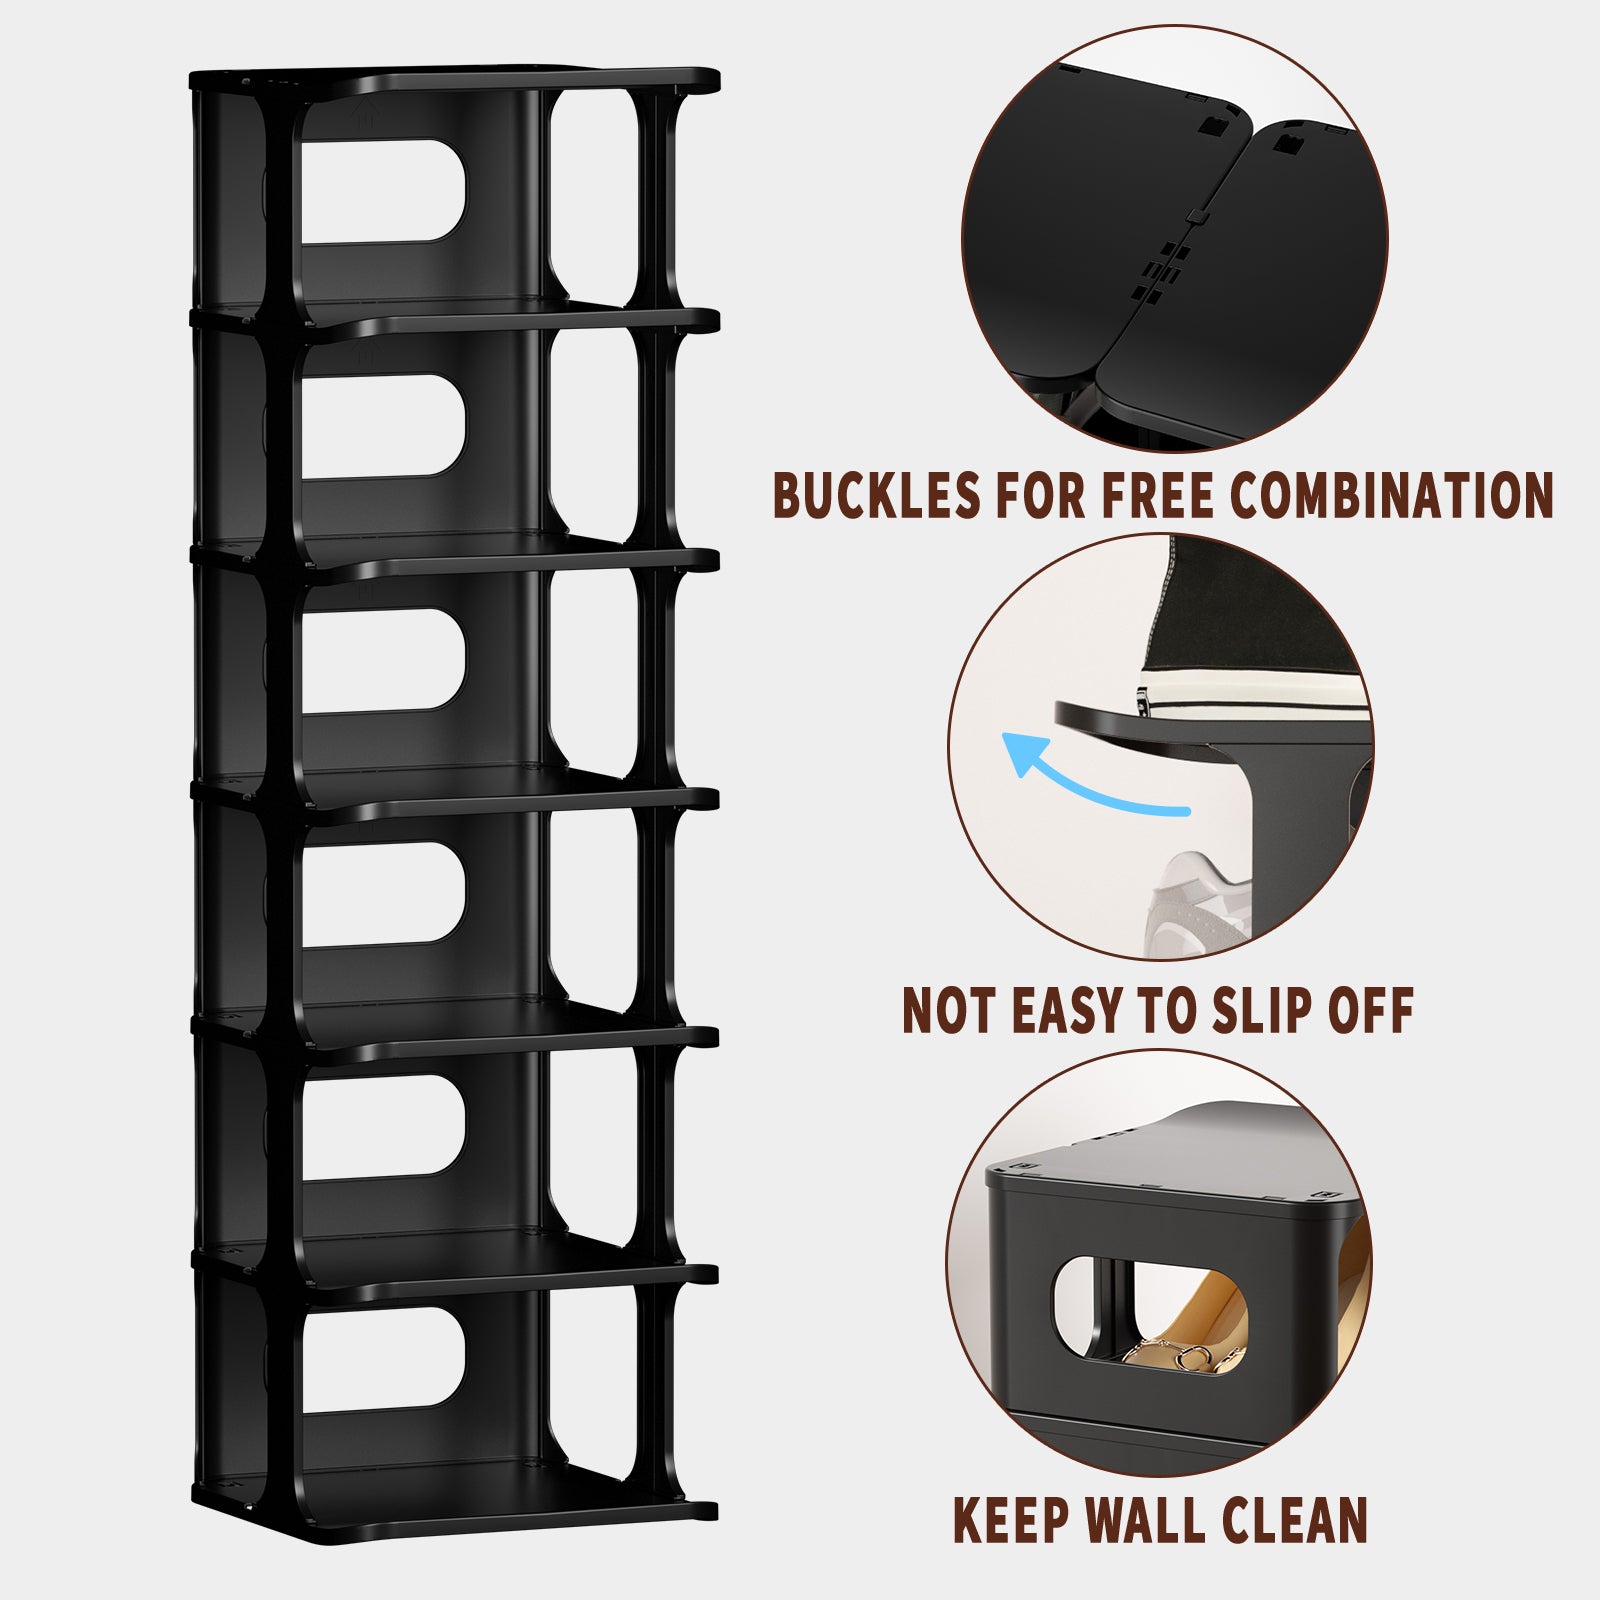  Foldable Shoe Rack, Plastic Shoe Rack Organizer, Can Hold 8-12  Pairs of Shoes, Free Standing Shoe Racks Stackable Shoes Rack Storage Shelf  (4-Tier) : Home & Kitchen